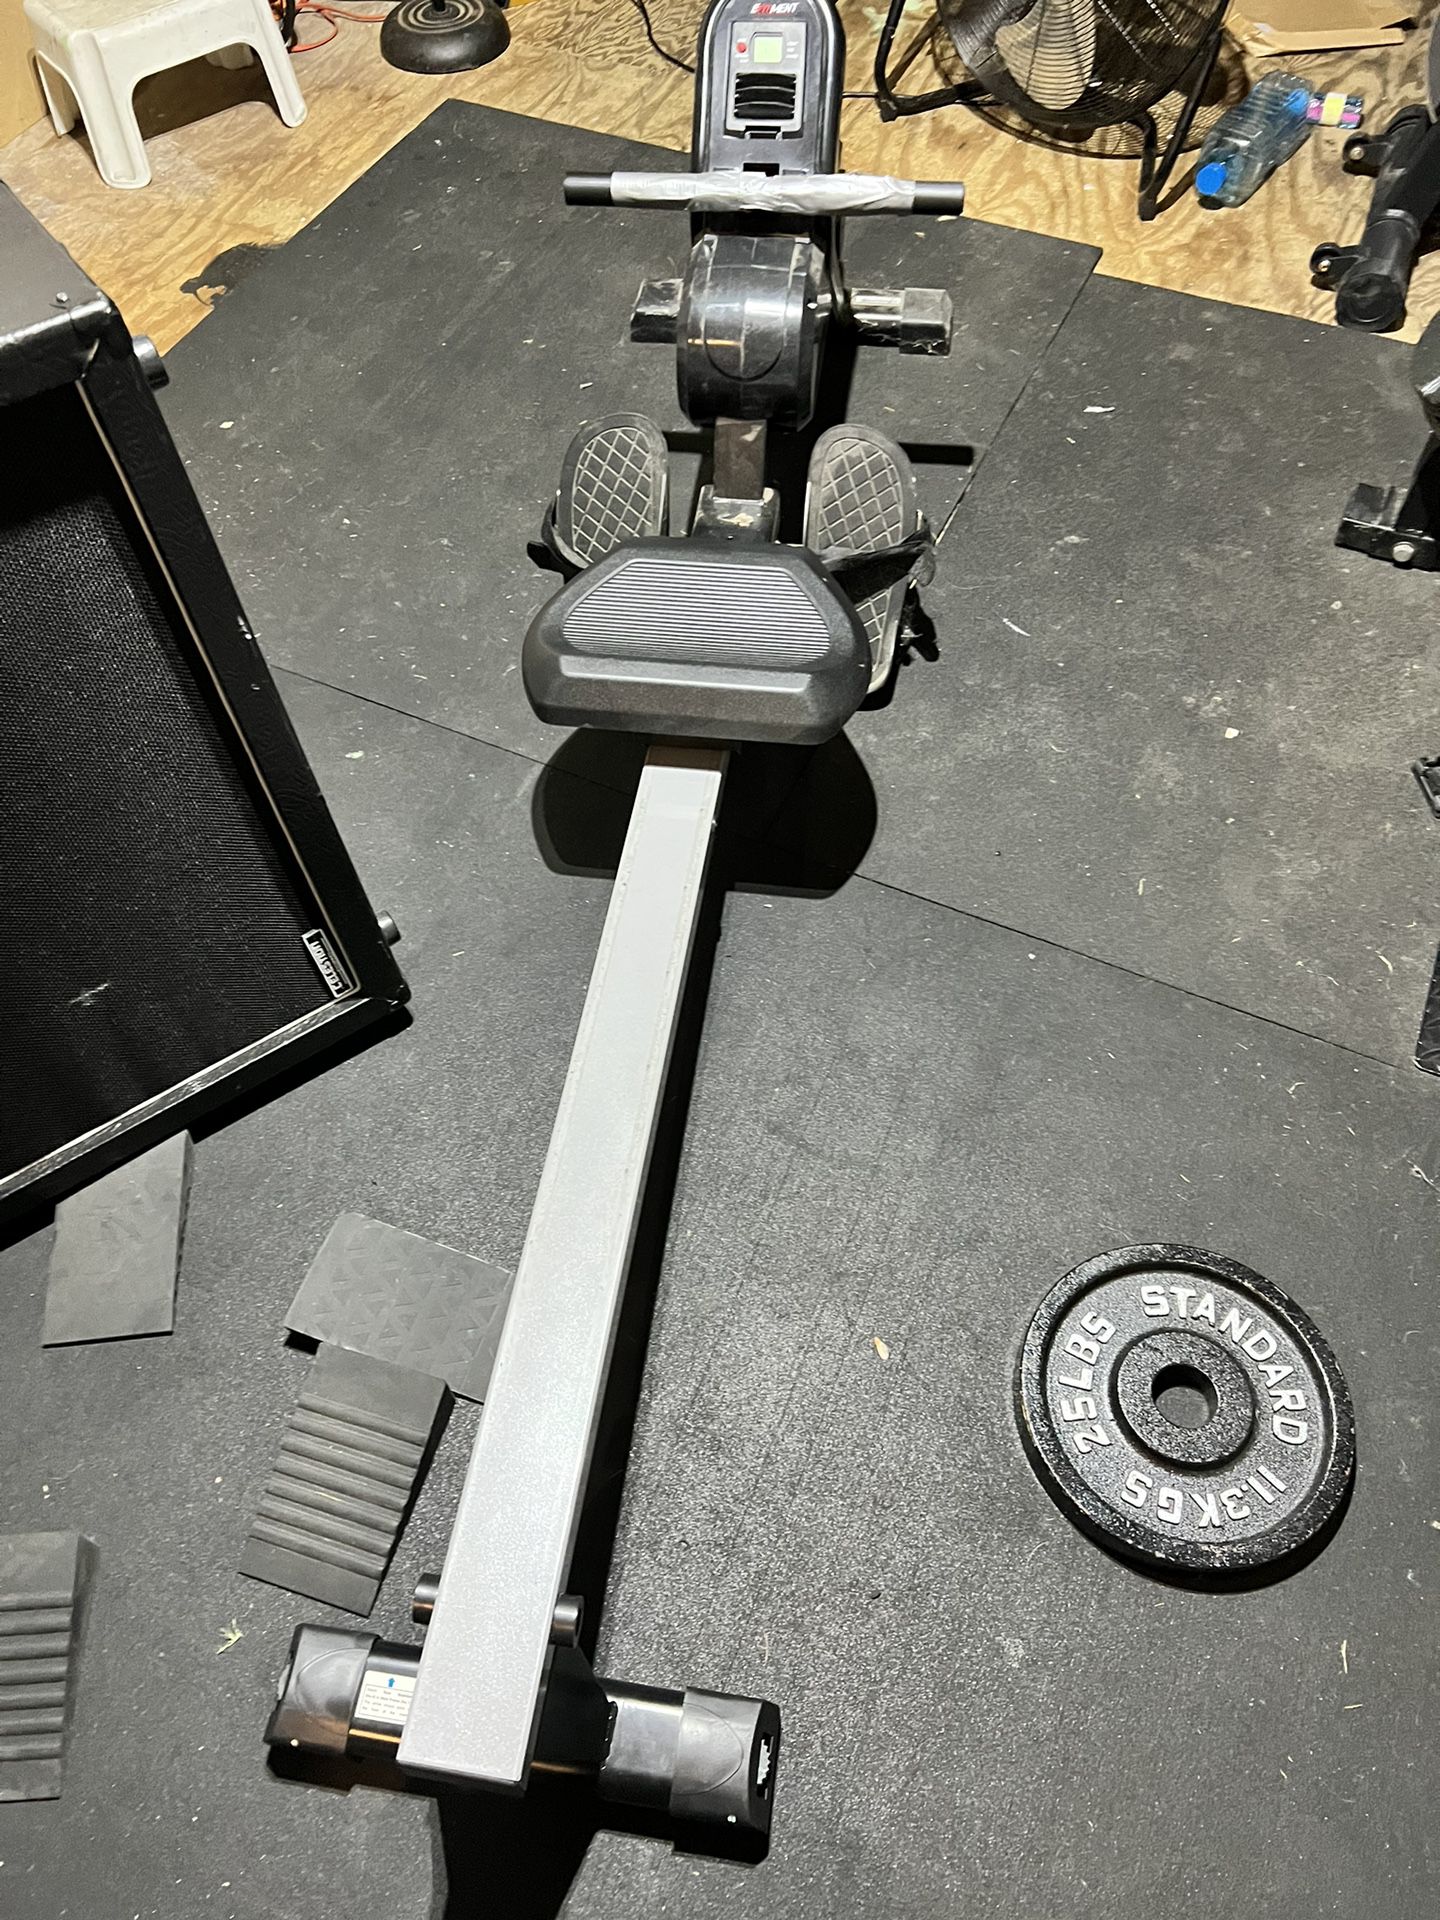 Compact Rowing Machine - Foldable - $200